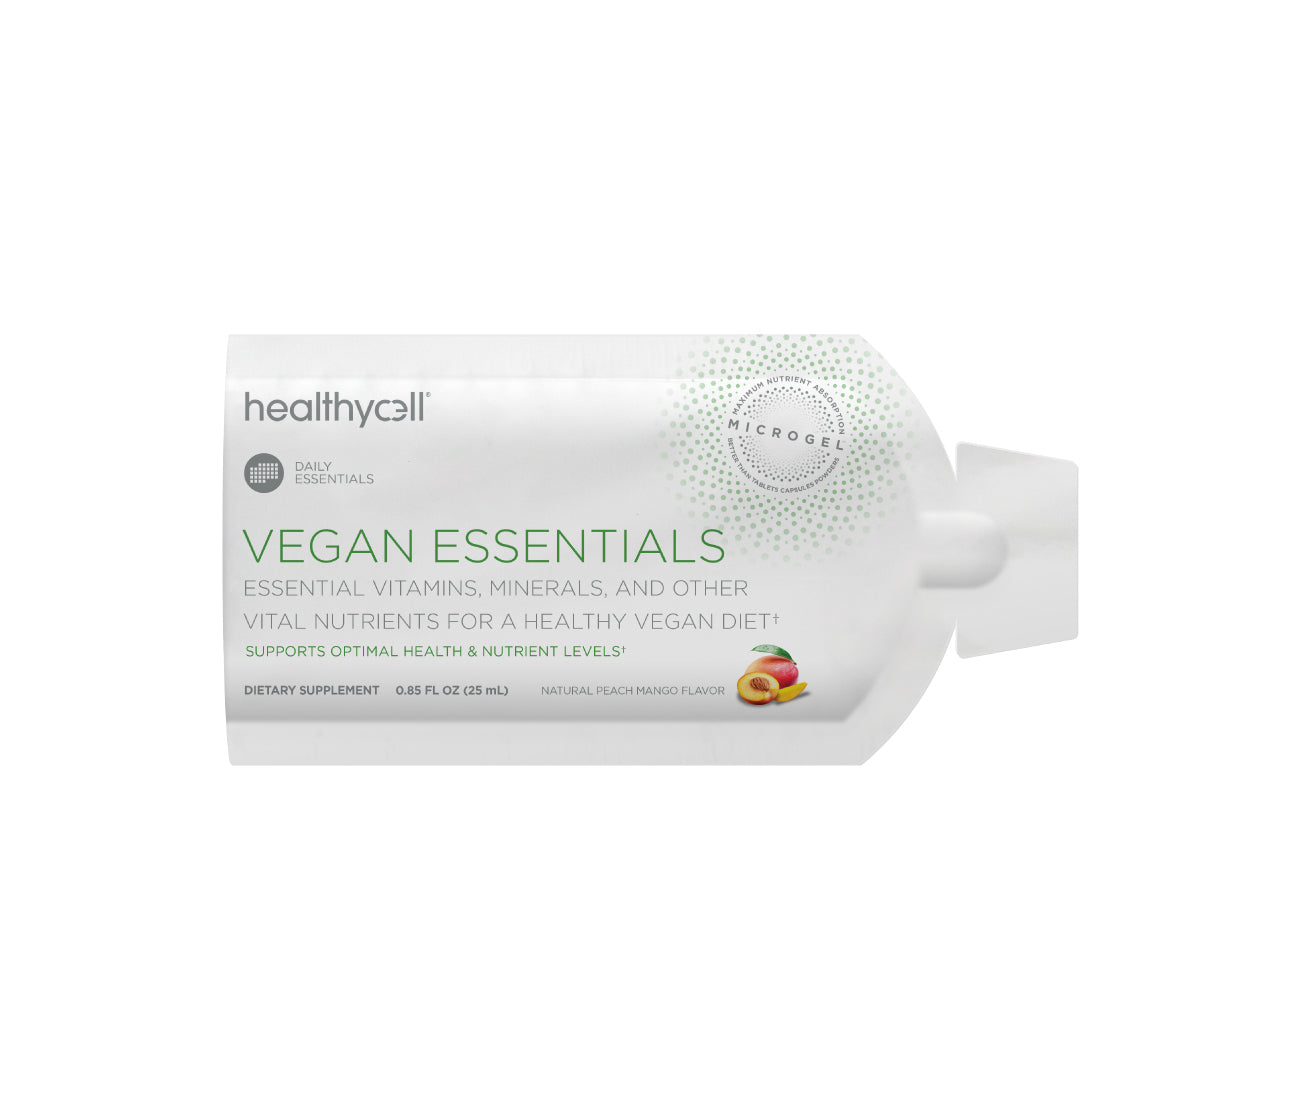 Vegan Essentials by Healthycell